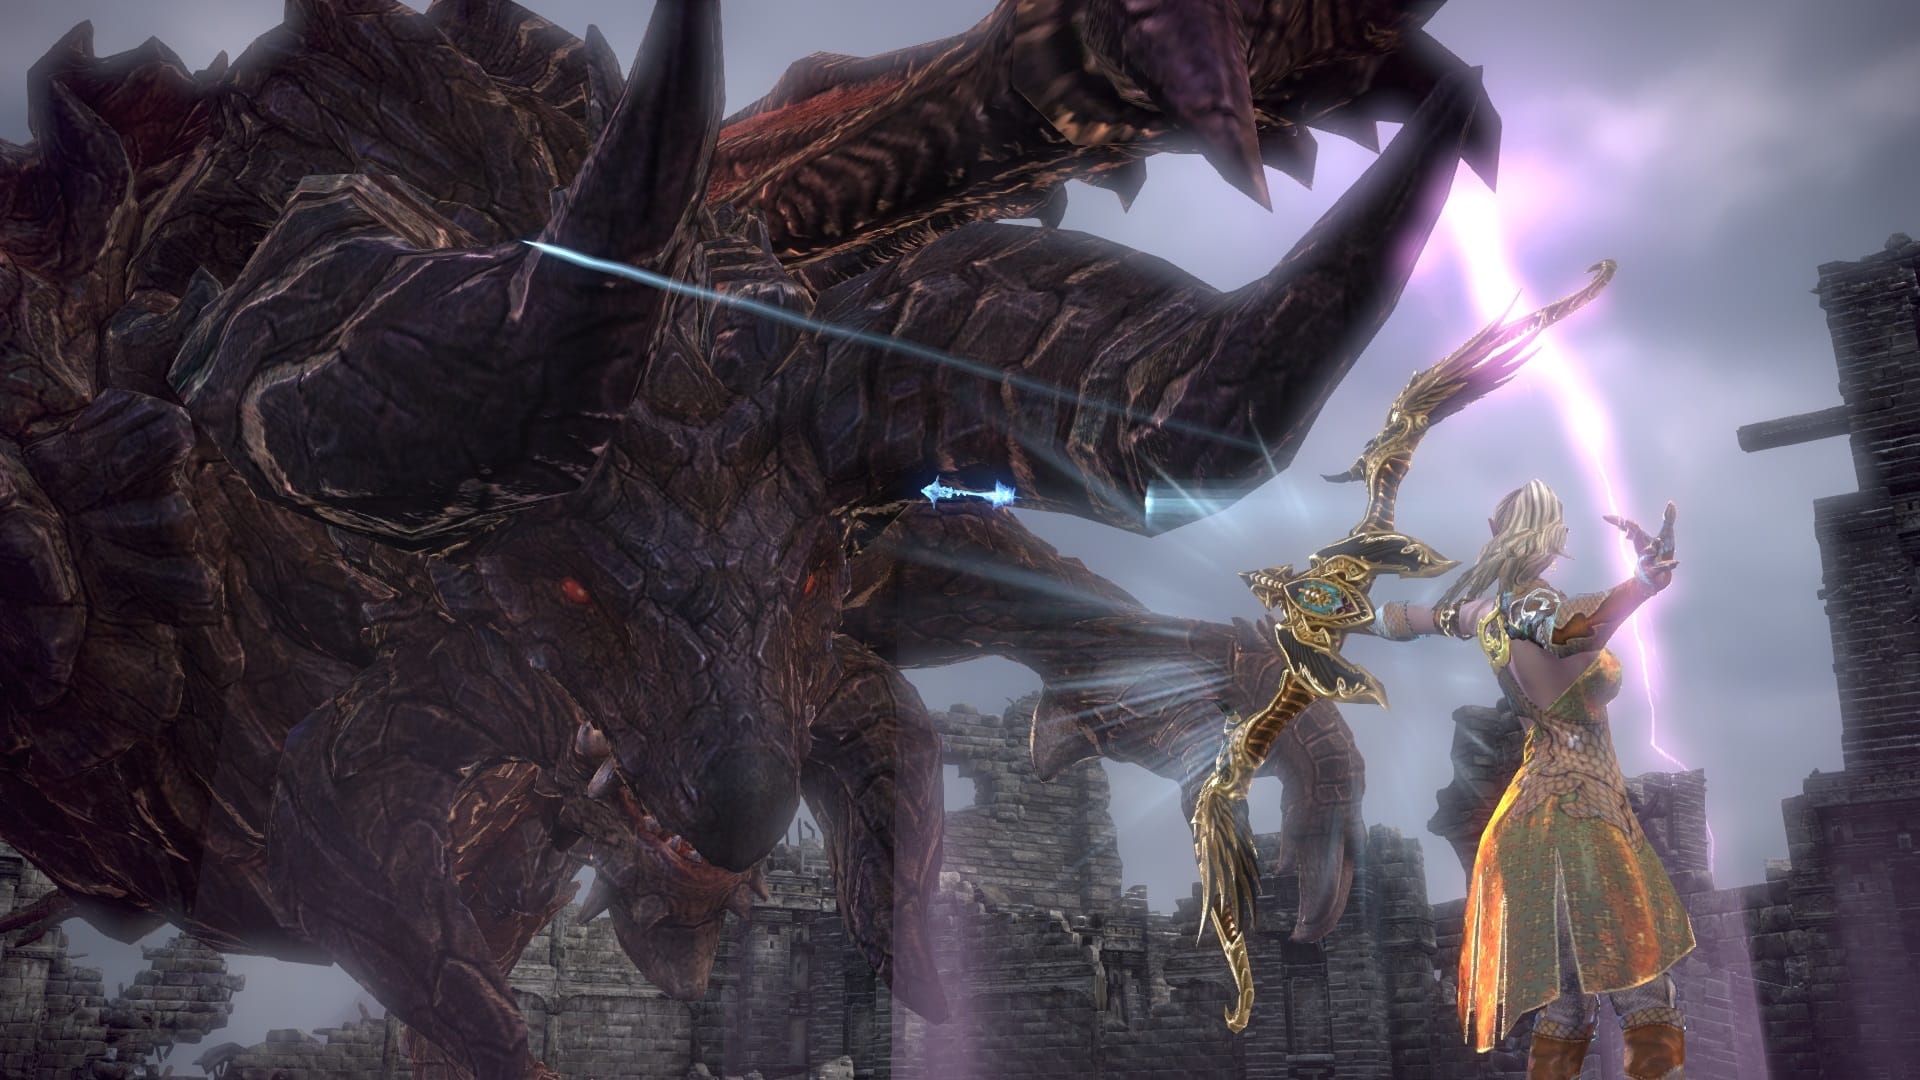 Best MMORPG games: Tera. Image shows an archer taking aim at a giant beast.